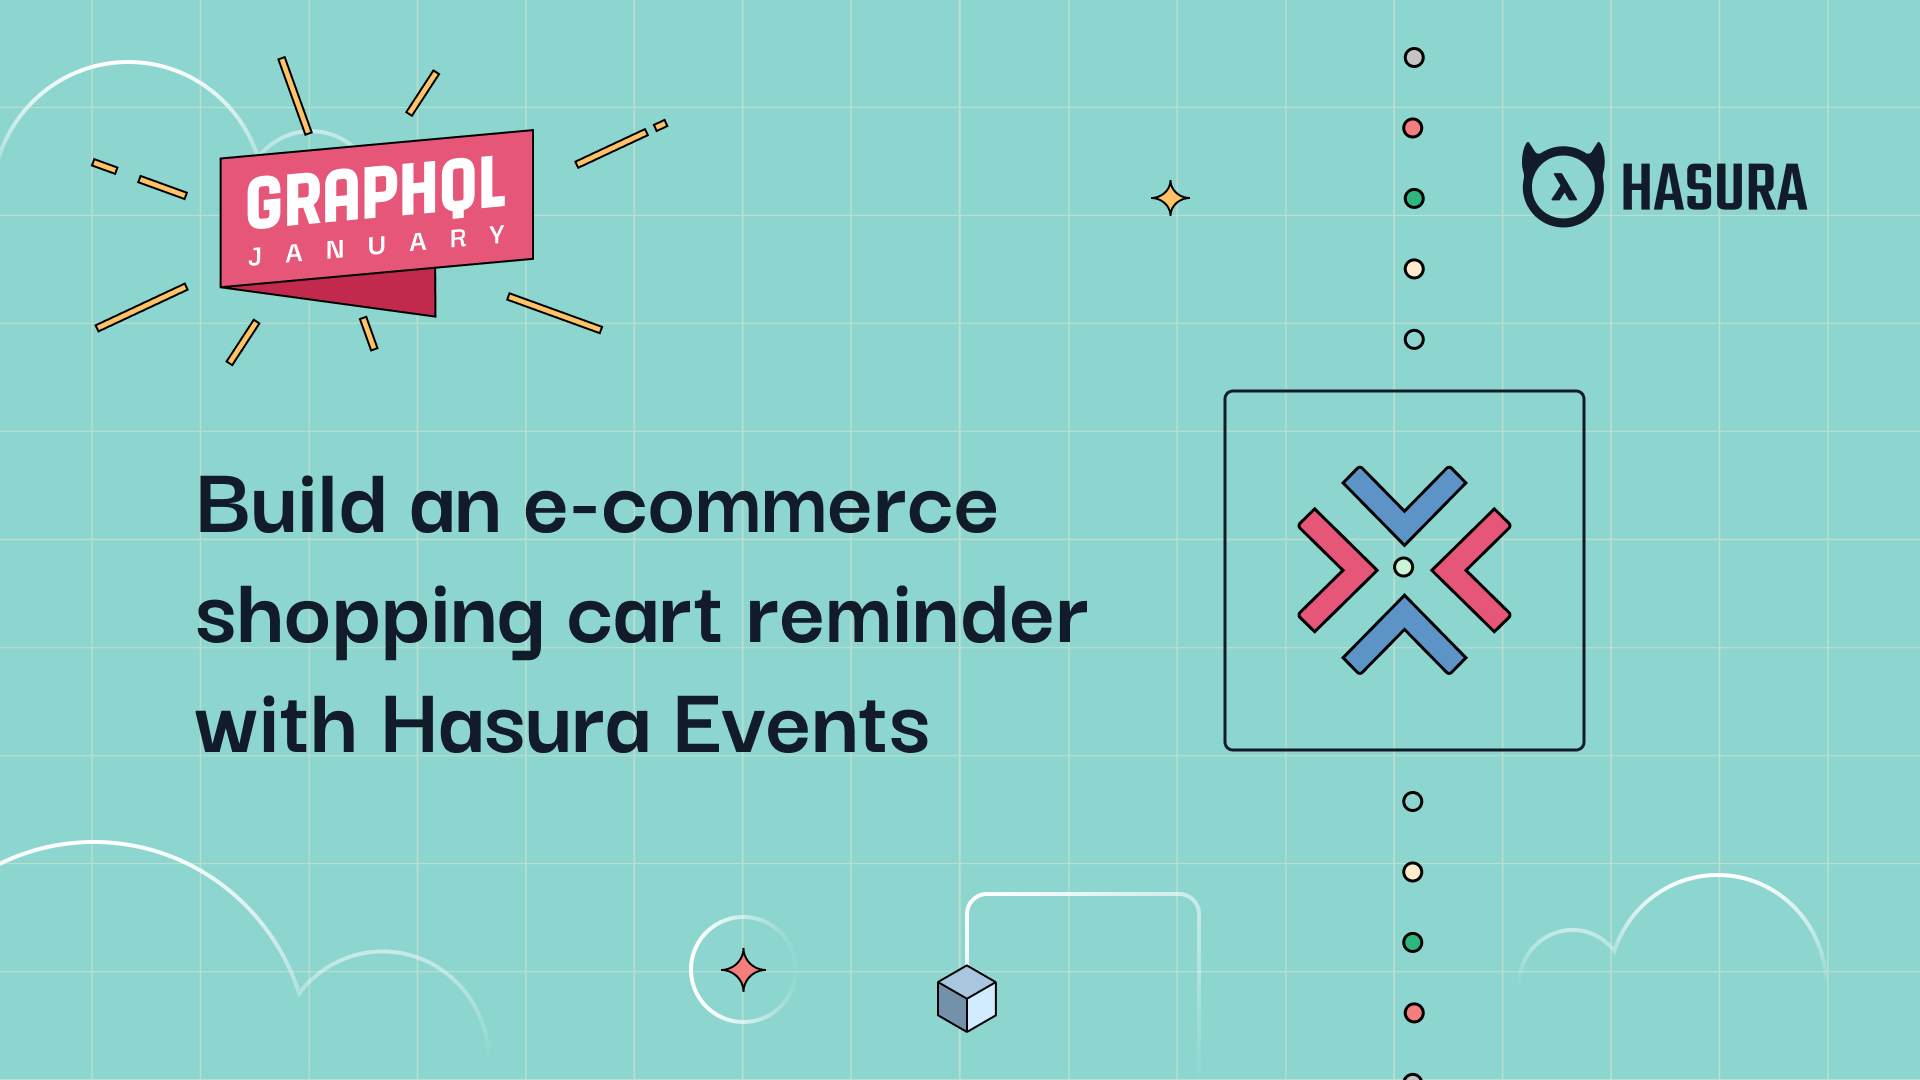 Build an e-commerce shopping cart reminder with Hasura Events